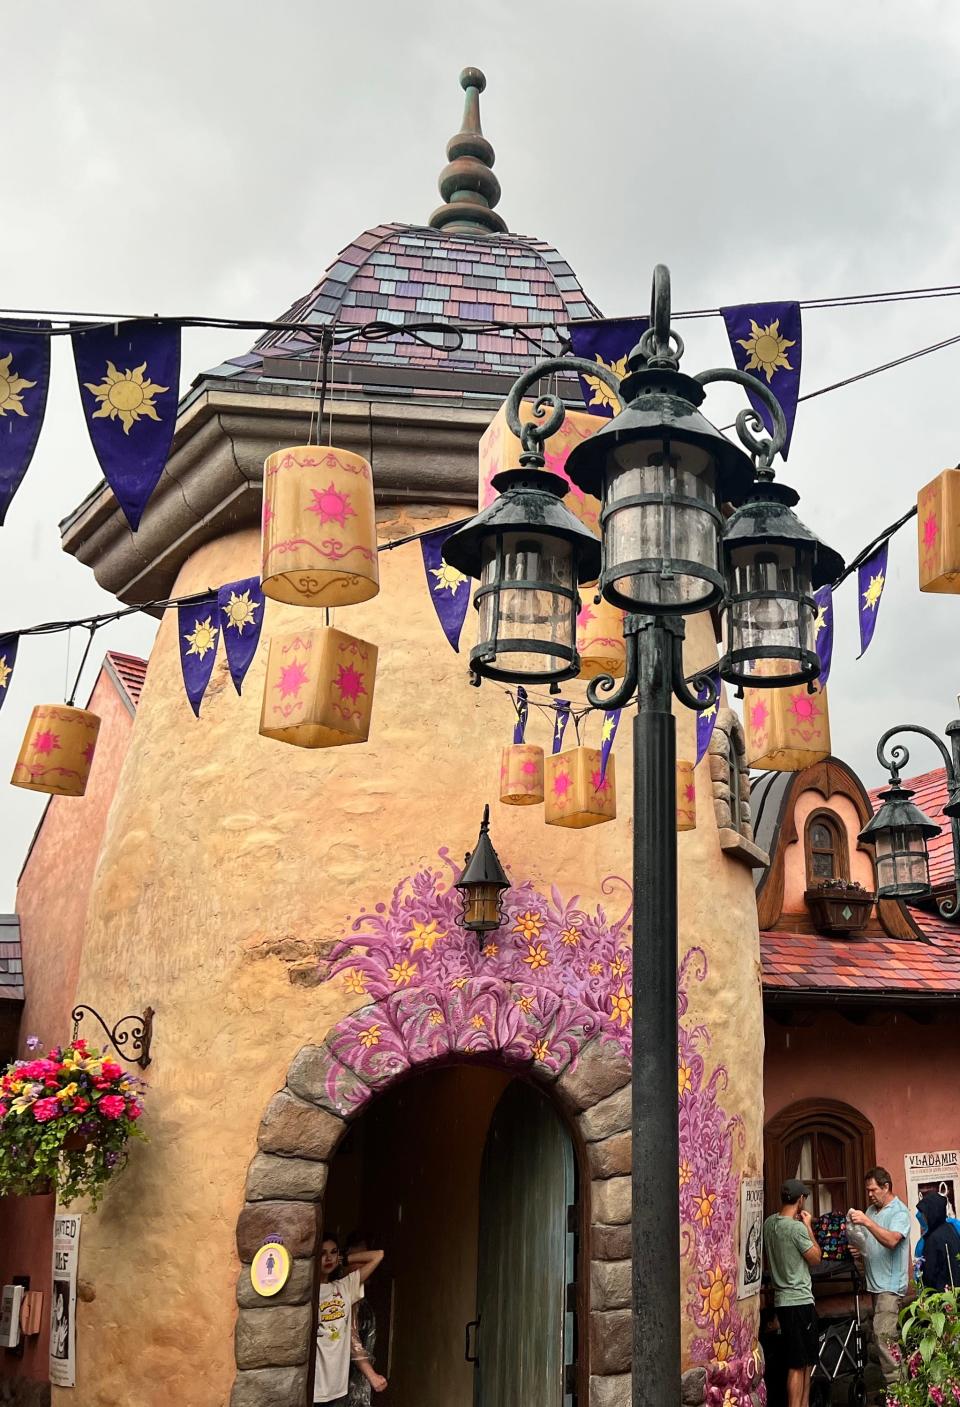 The lanterns near the "Tangled" theme restrooms on the edge of Magic Kingdom's Fantasyland light up at night, like in the movie.